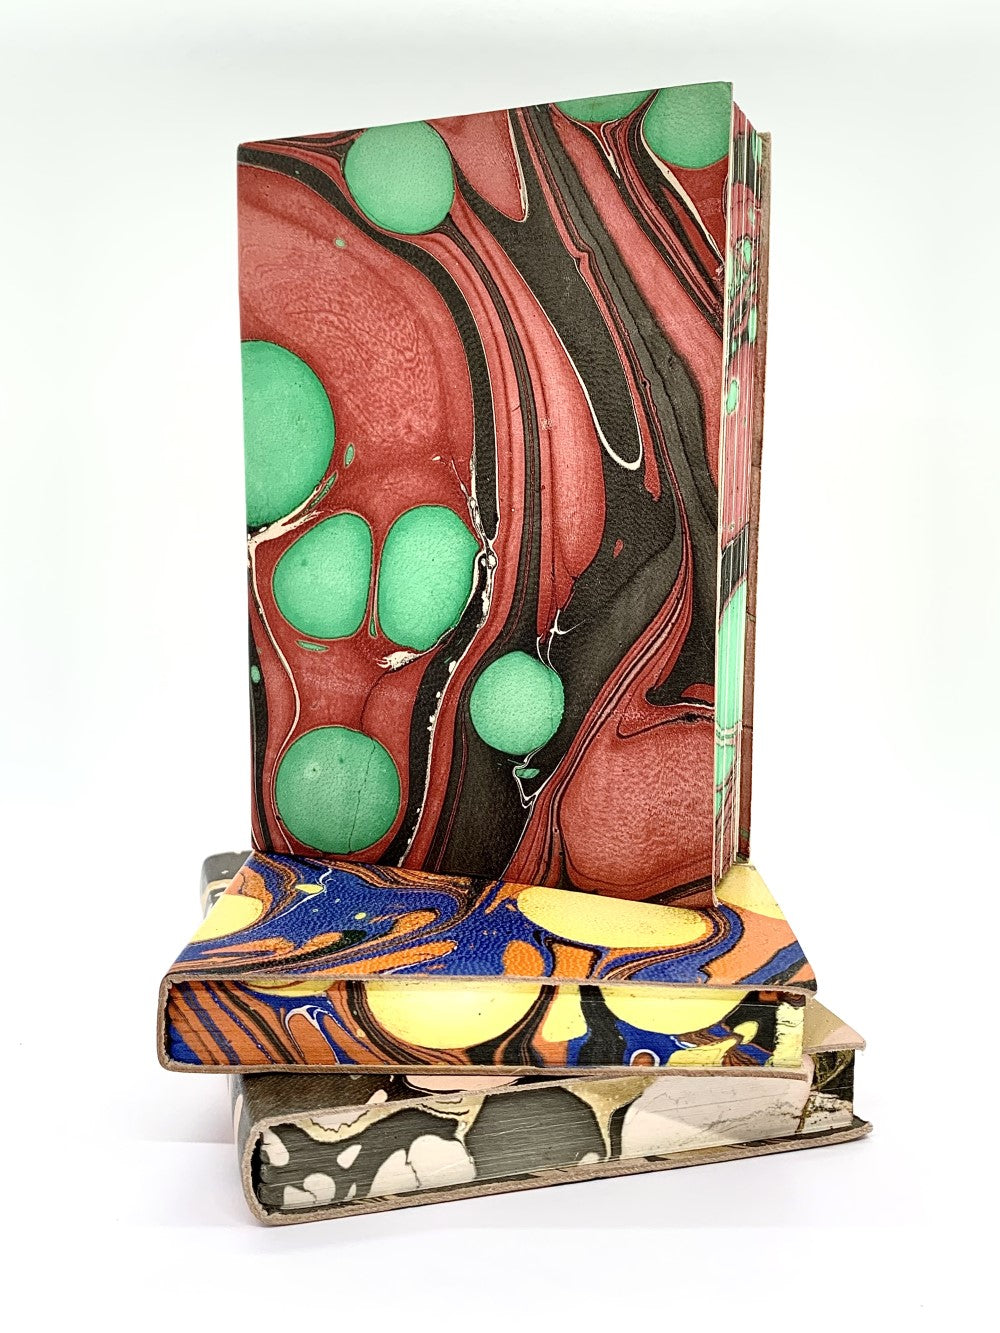 The Harley Online Gallery Shop // Red, green and black marbled leather book by RE-foundobjects